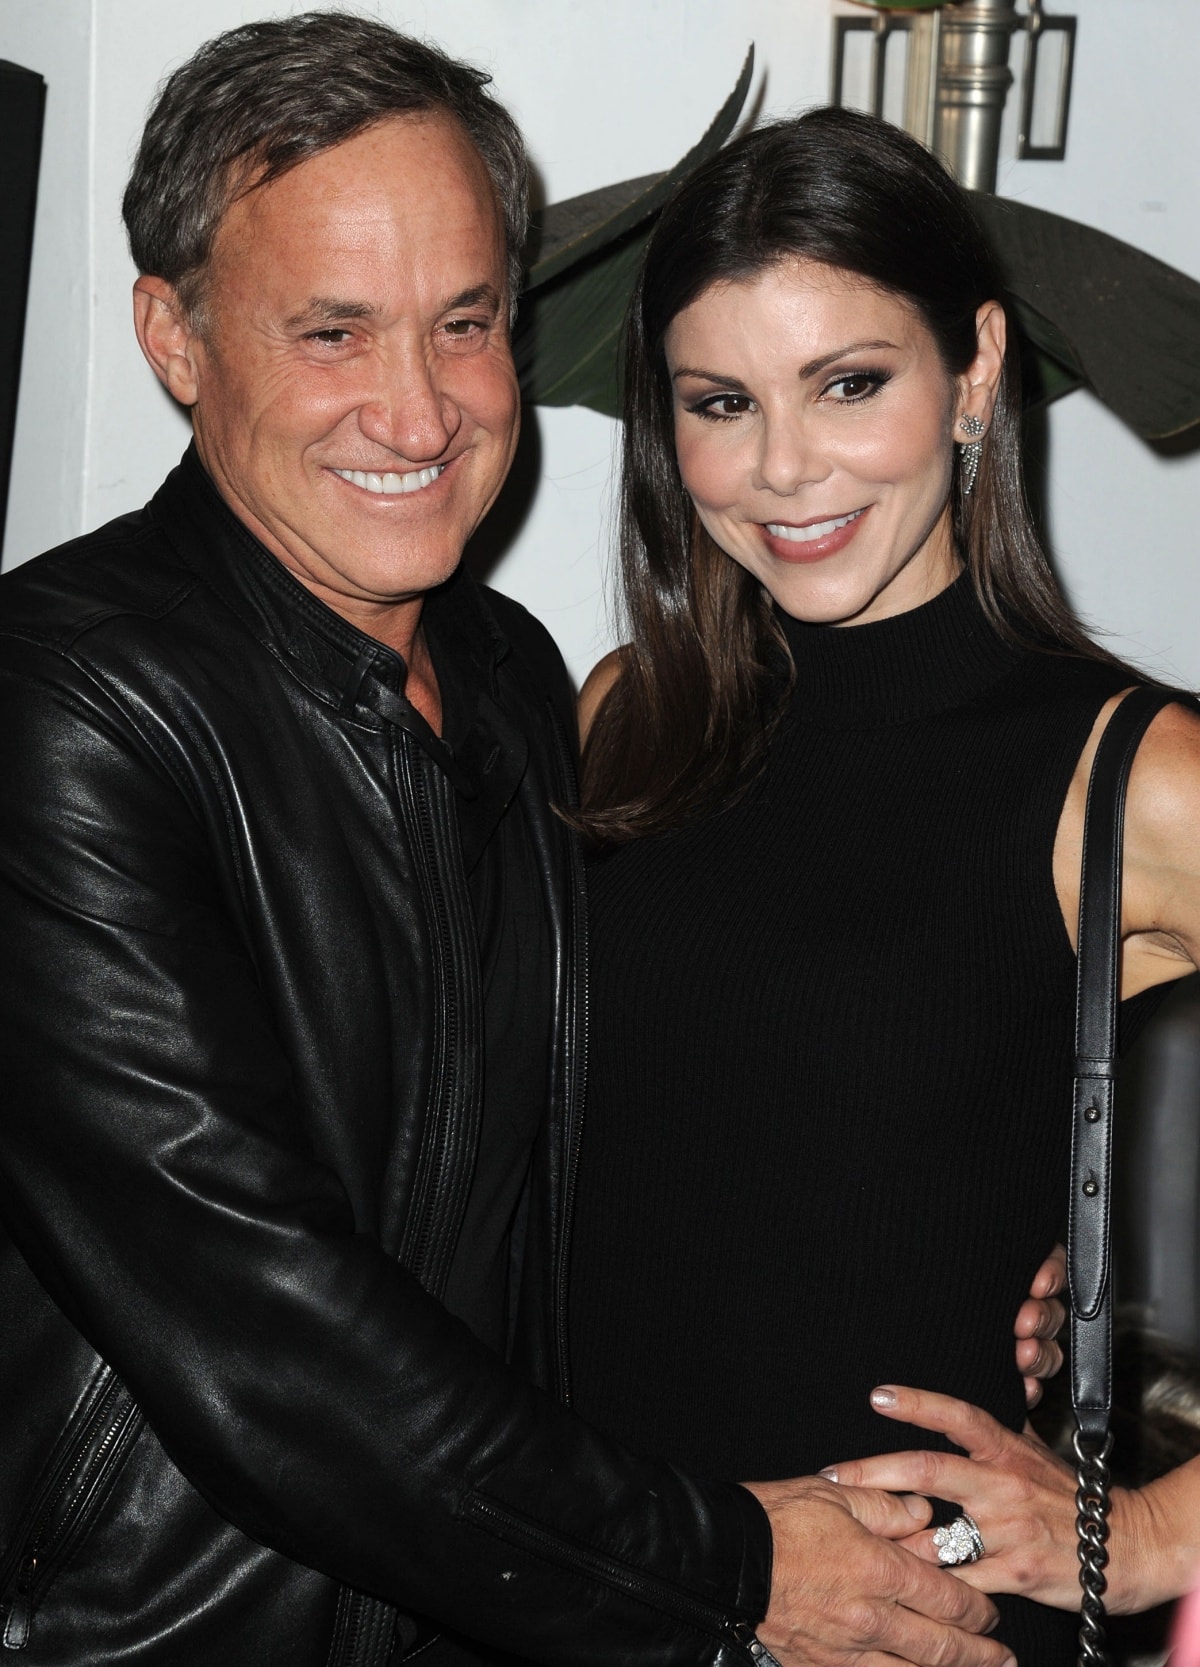 Terry Dubrow owes his life to wife Heather, whom he has been married to since 1999 and with whom he shares four kids together